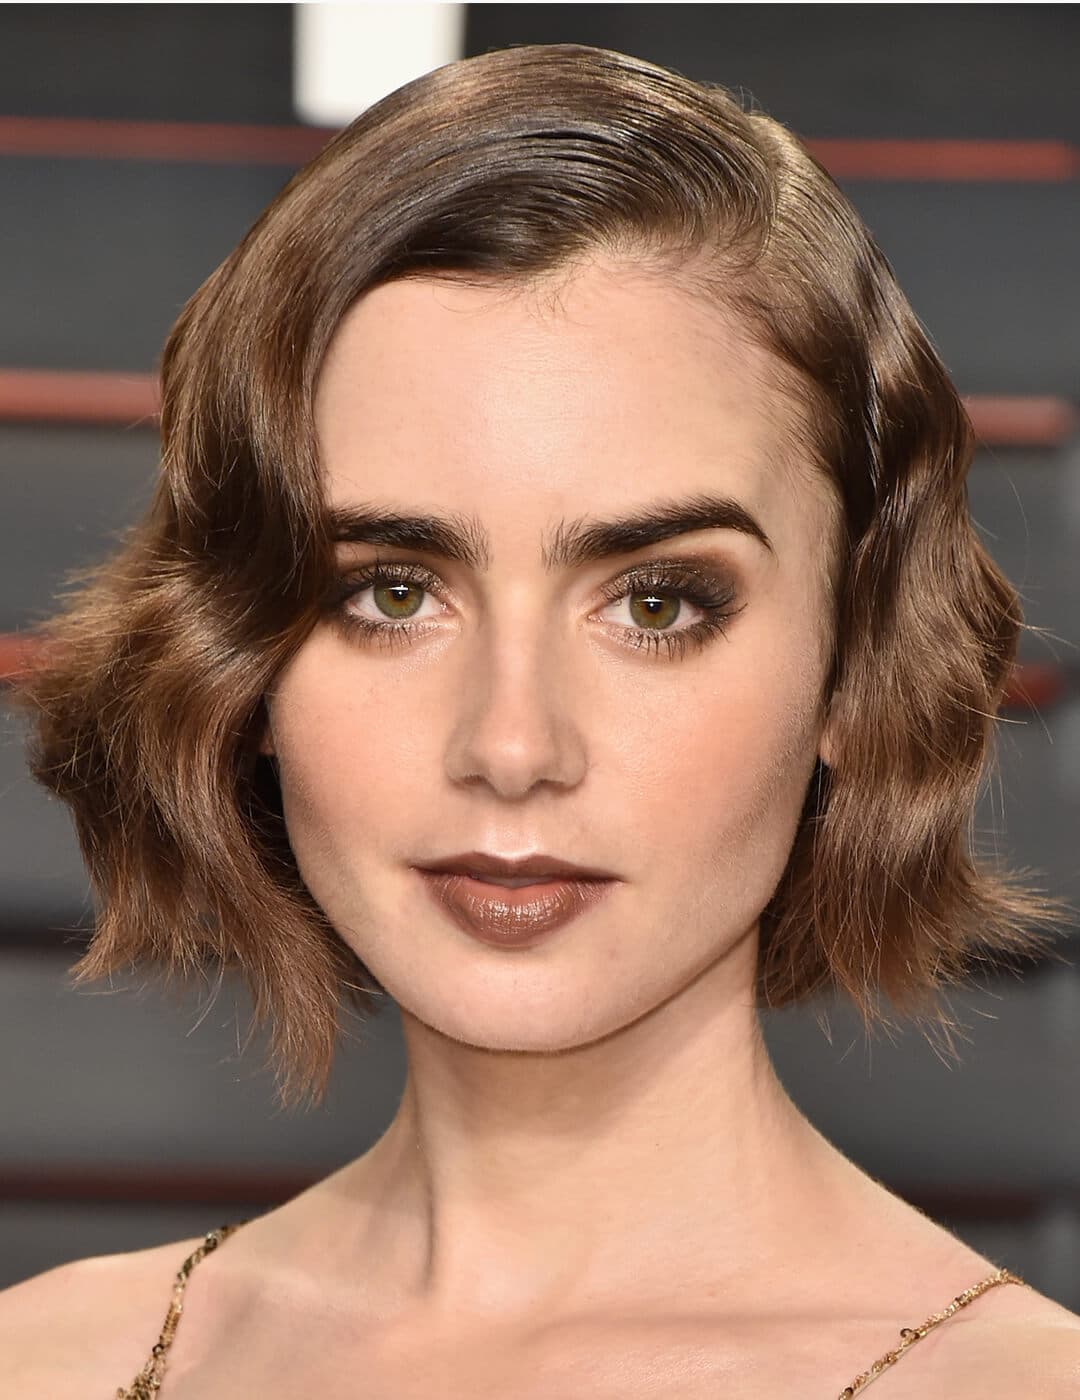 Lily Collins sporting a deep brown monochromatic makeup look